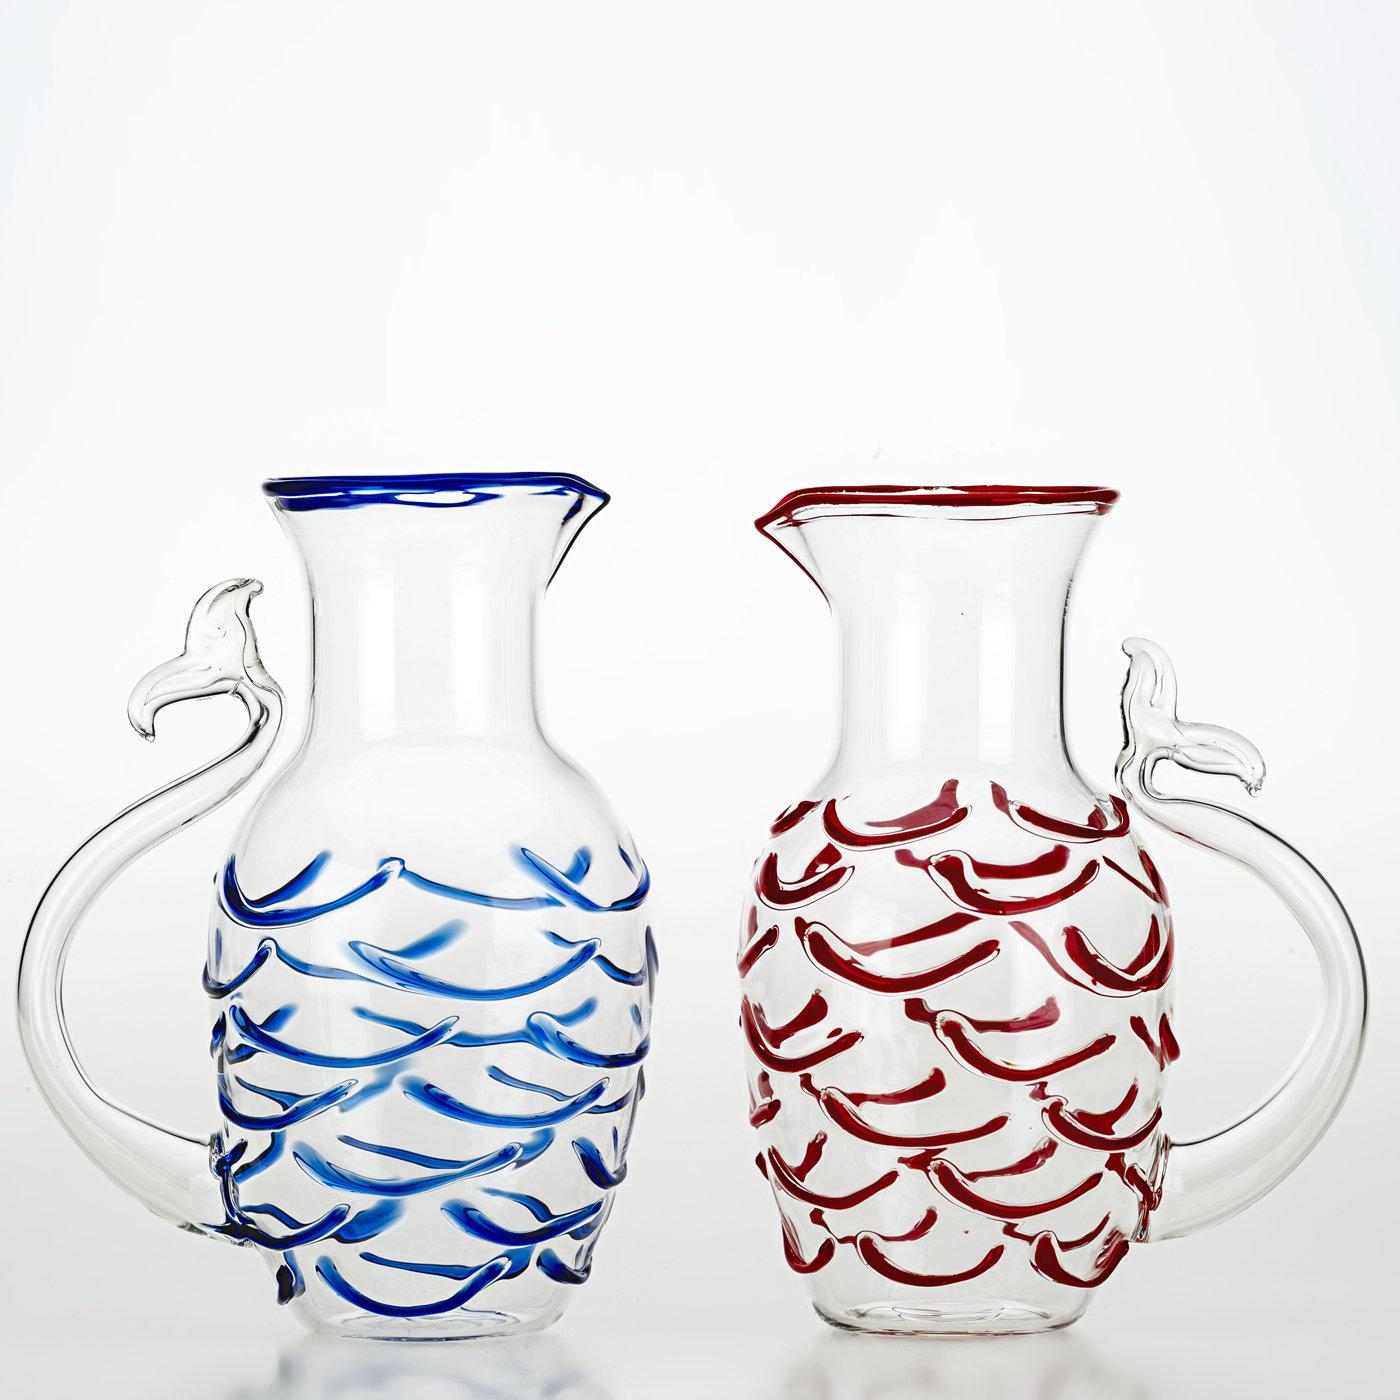 This jug was inspired by the majestic world of the sea. Its body is reminiscent of the sinuous forms of a fish and its curving handle takes the shape of a fish tail. The transparent vessel is covered in a textured scale pattern in glass with a